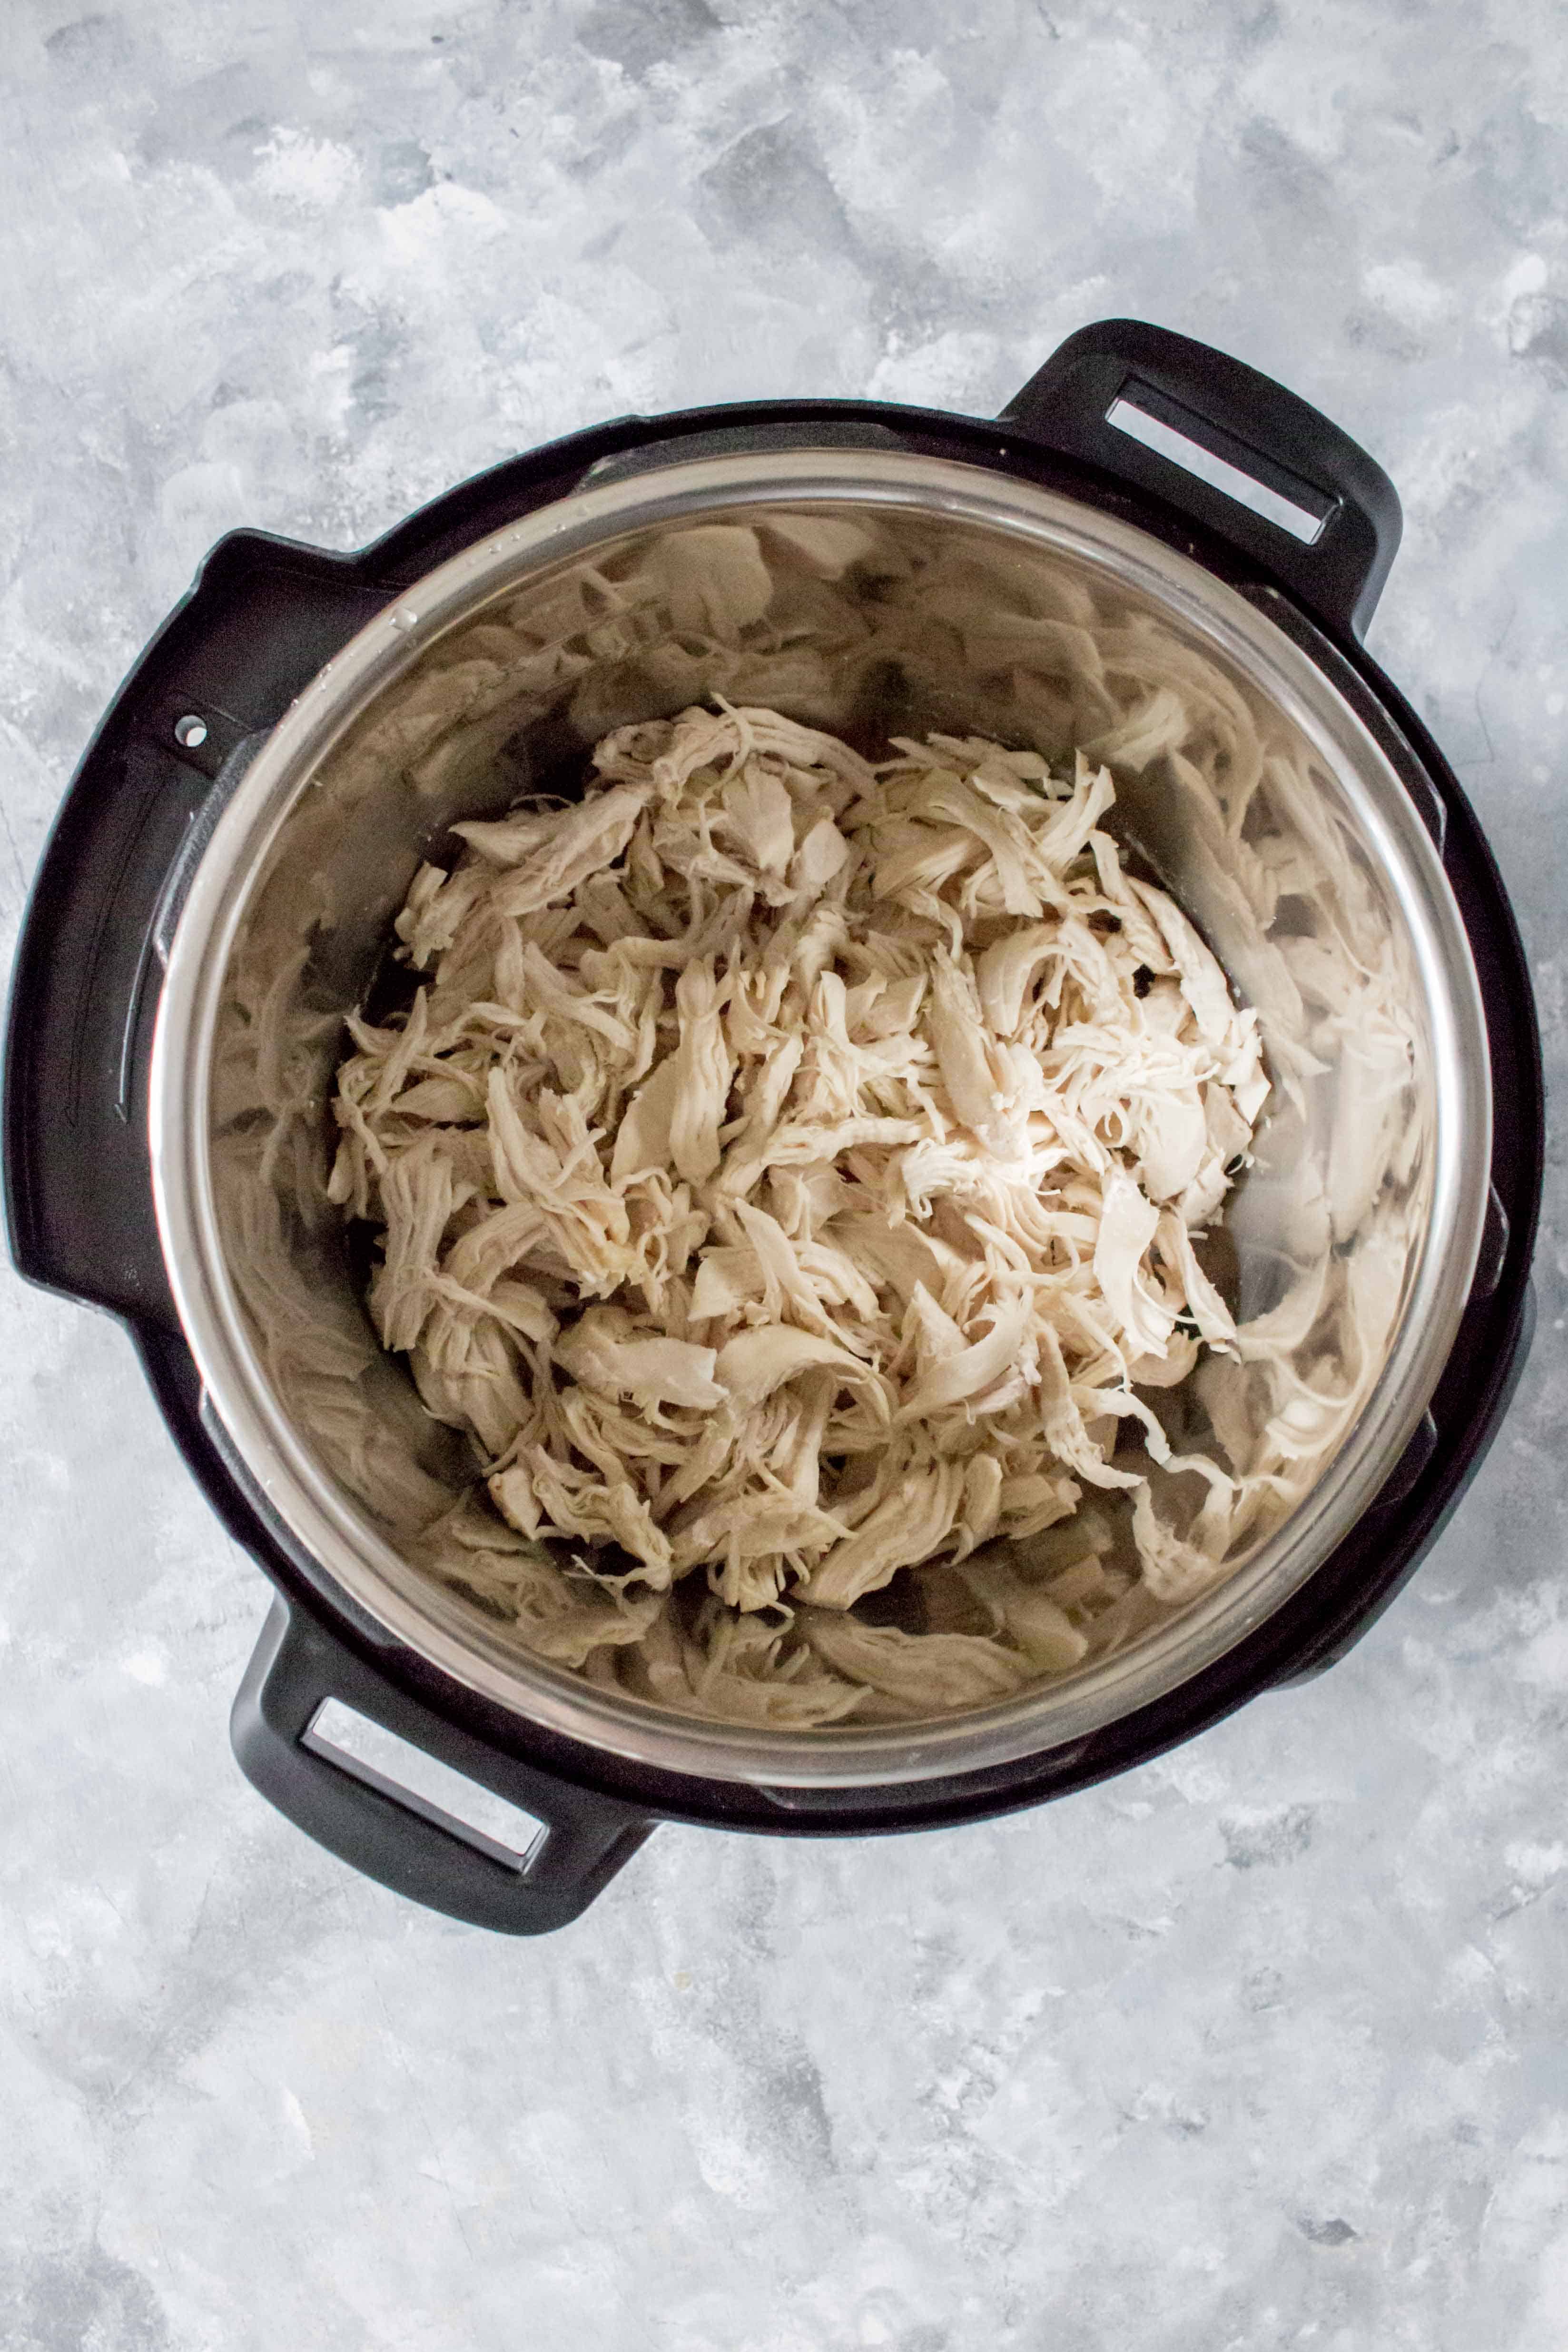 This Instant Pot Shredded Chicken is perfectly moist, tender, and easy to make! Use this shredded chicken for your meal prep, freeze for later, or as an addition to any meal you've got planned for the week!